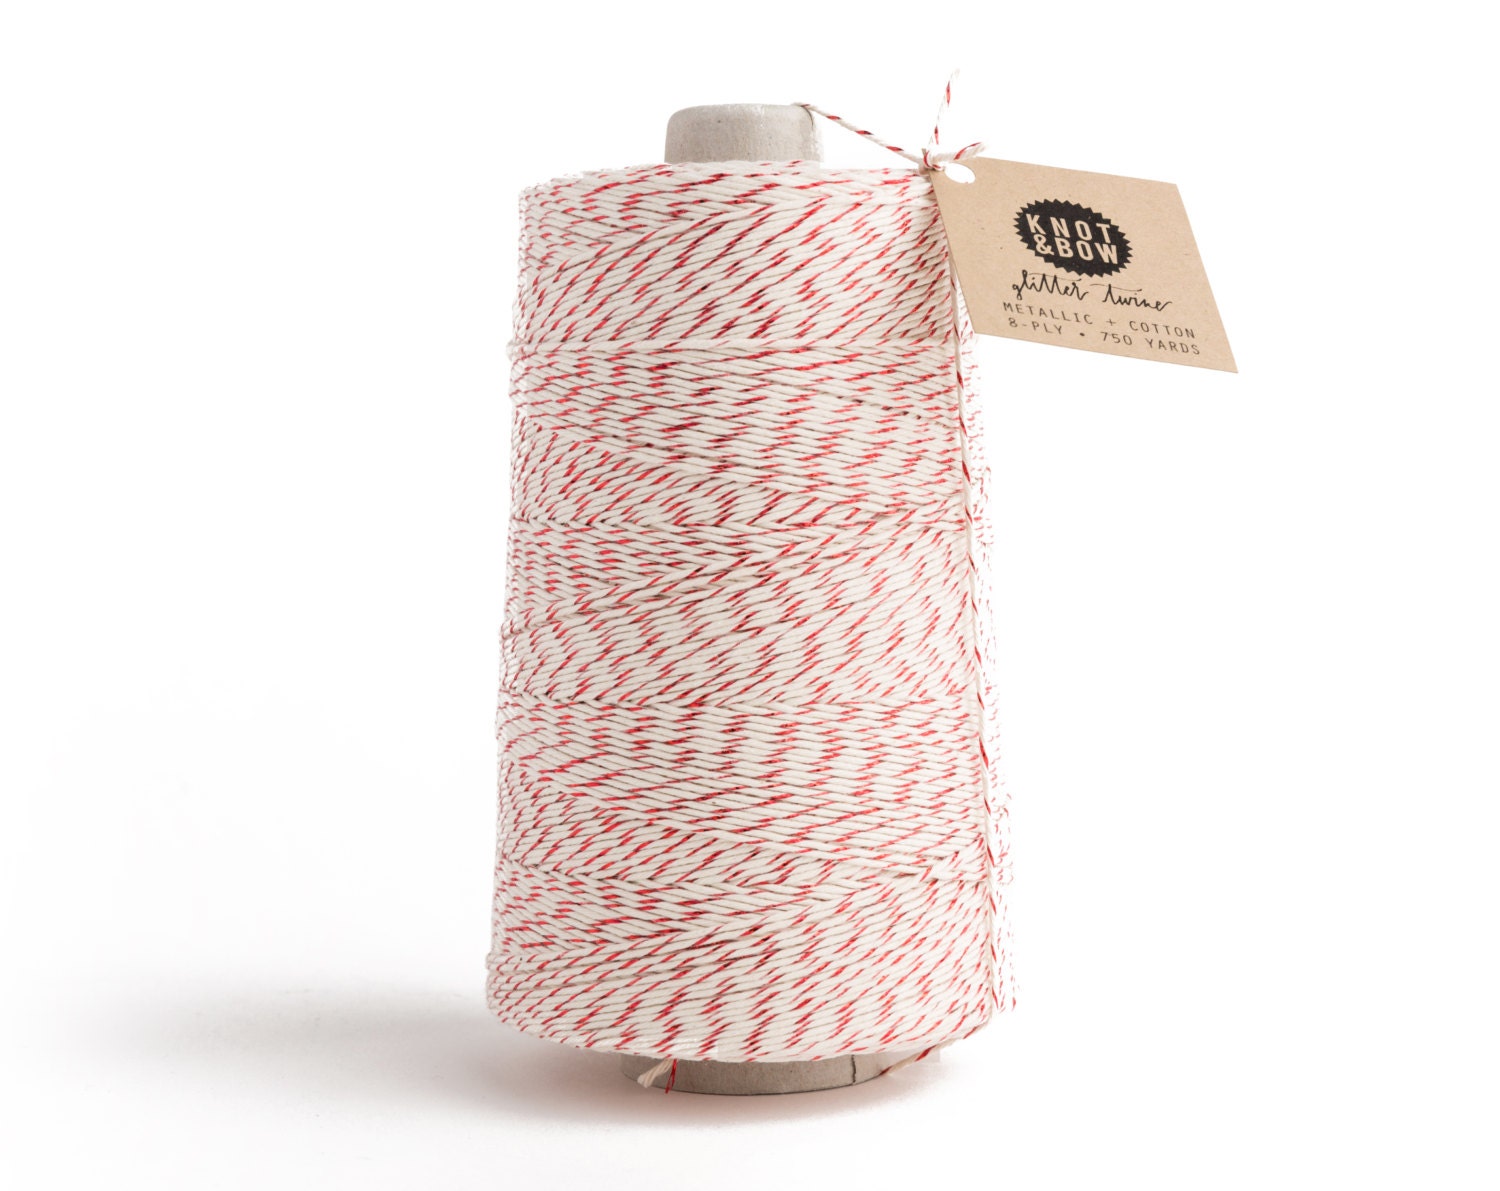 Paper Wrapping Twine Gift Wrap Twine Paper Twine Gift Wrapping